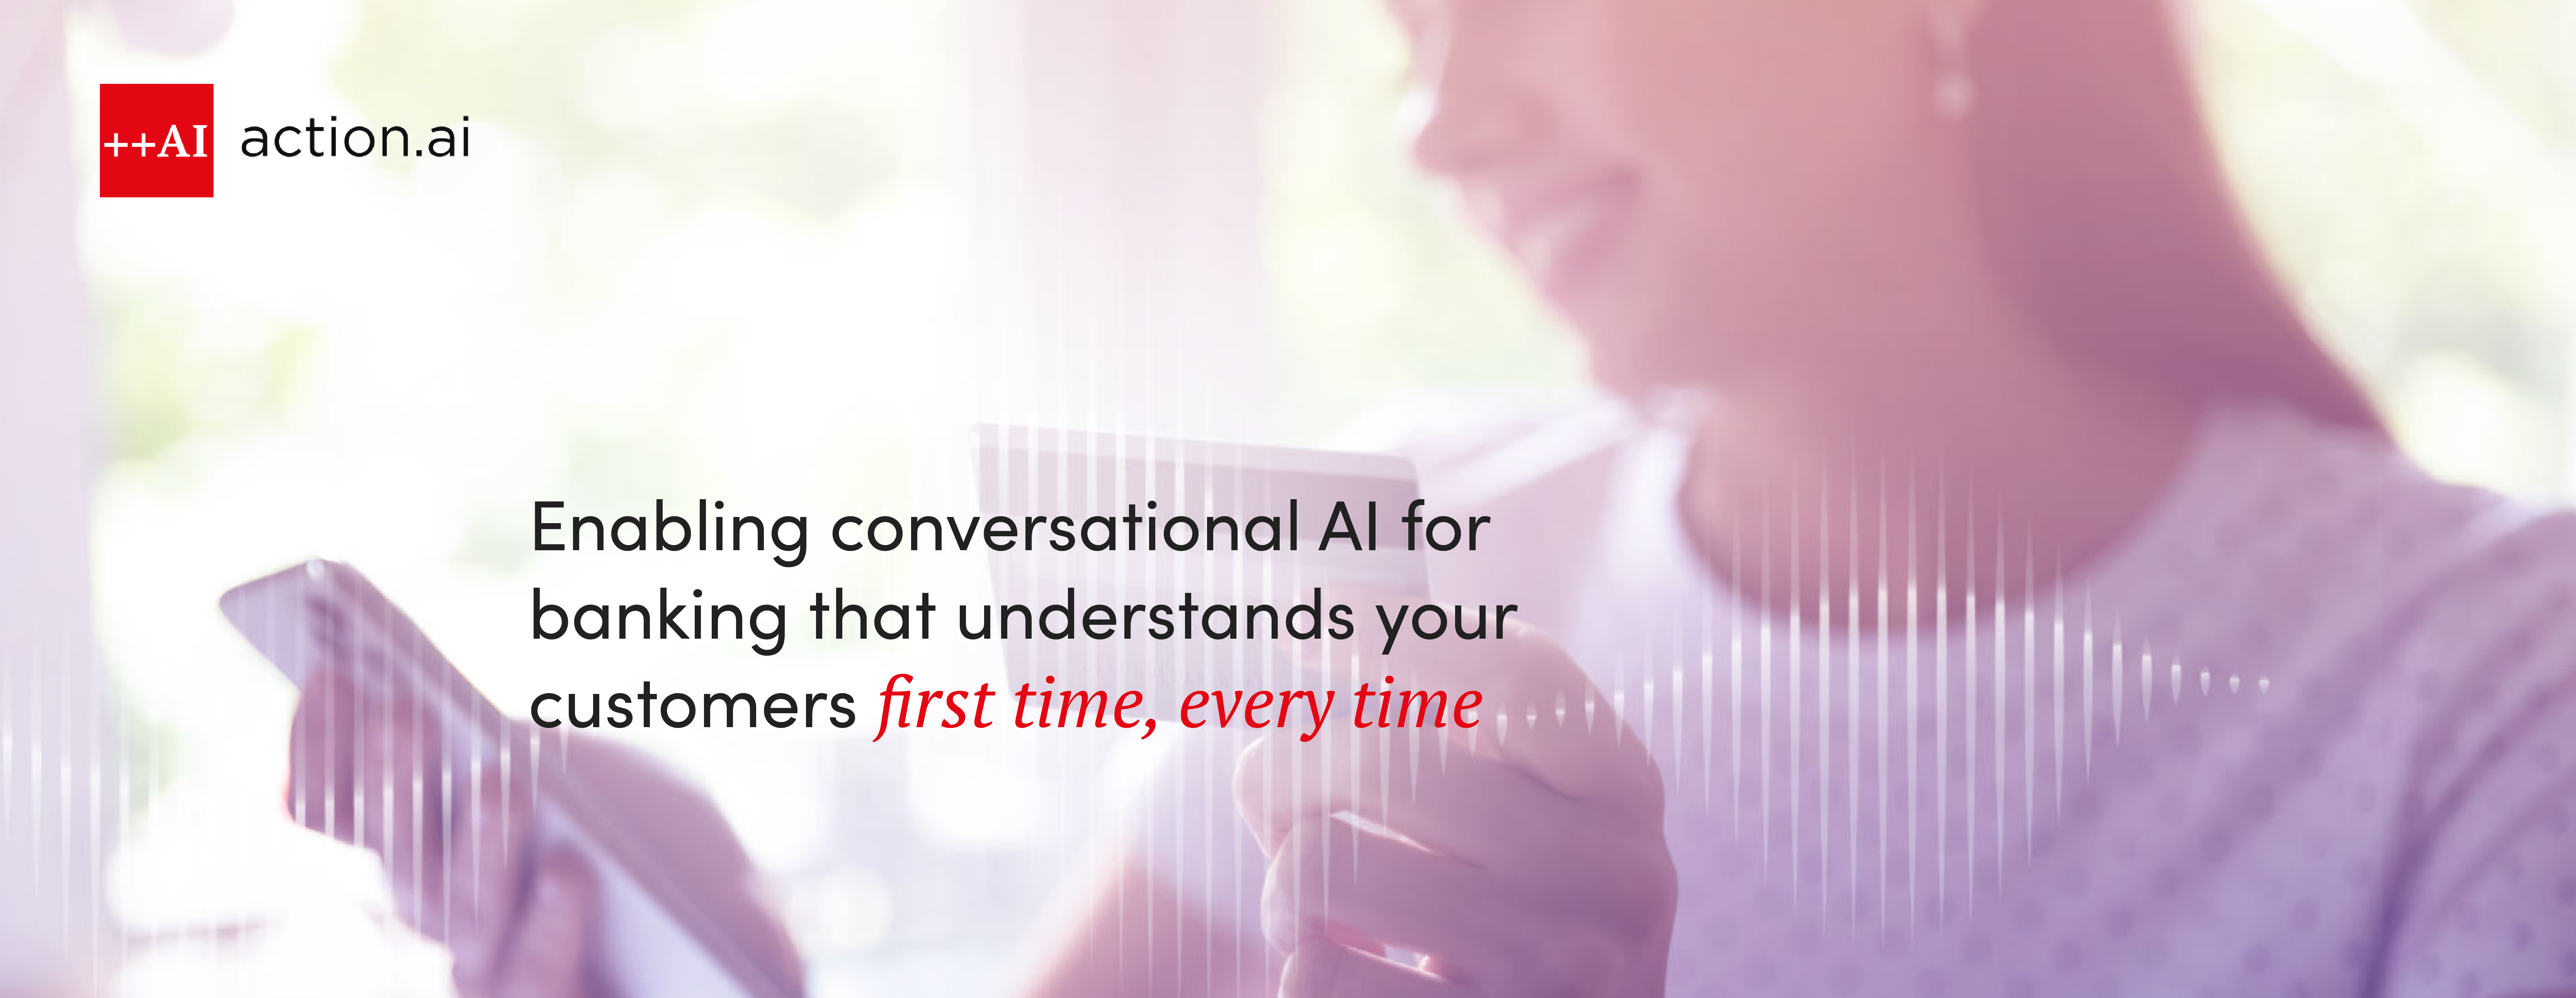 Conversational AI for banking